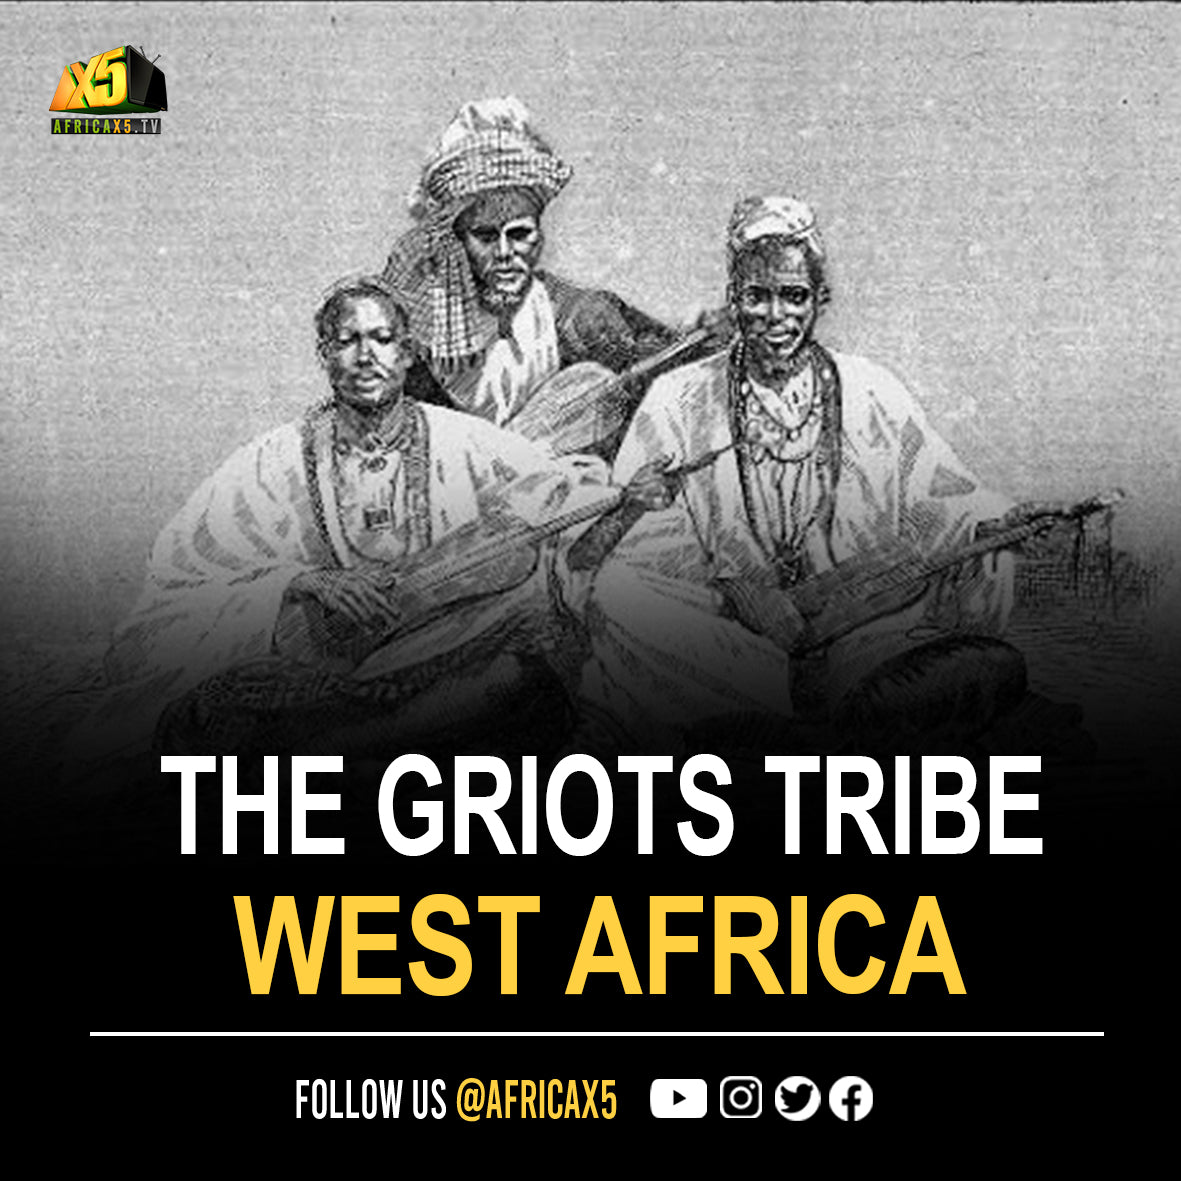 The 'Griots' of West Africa